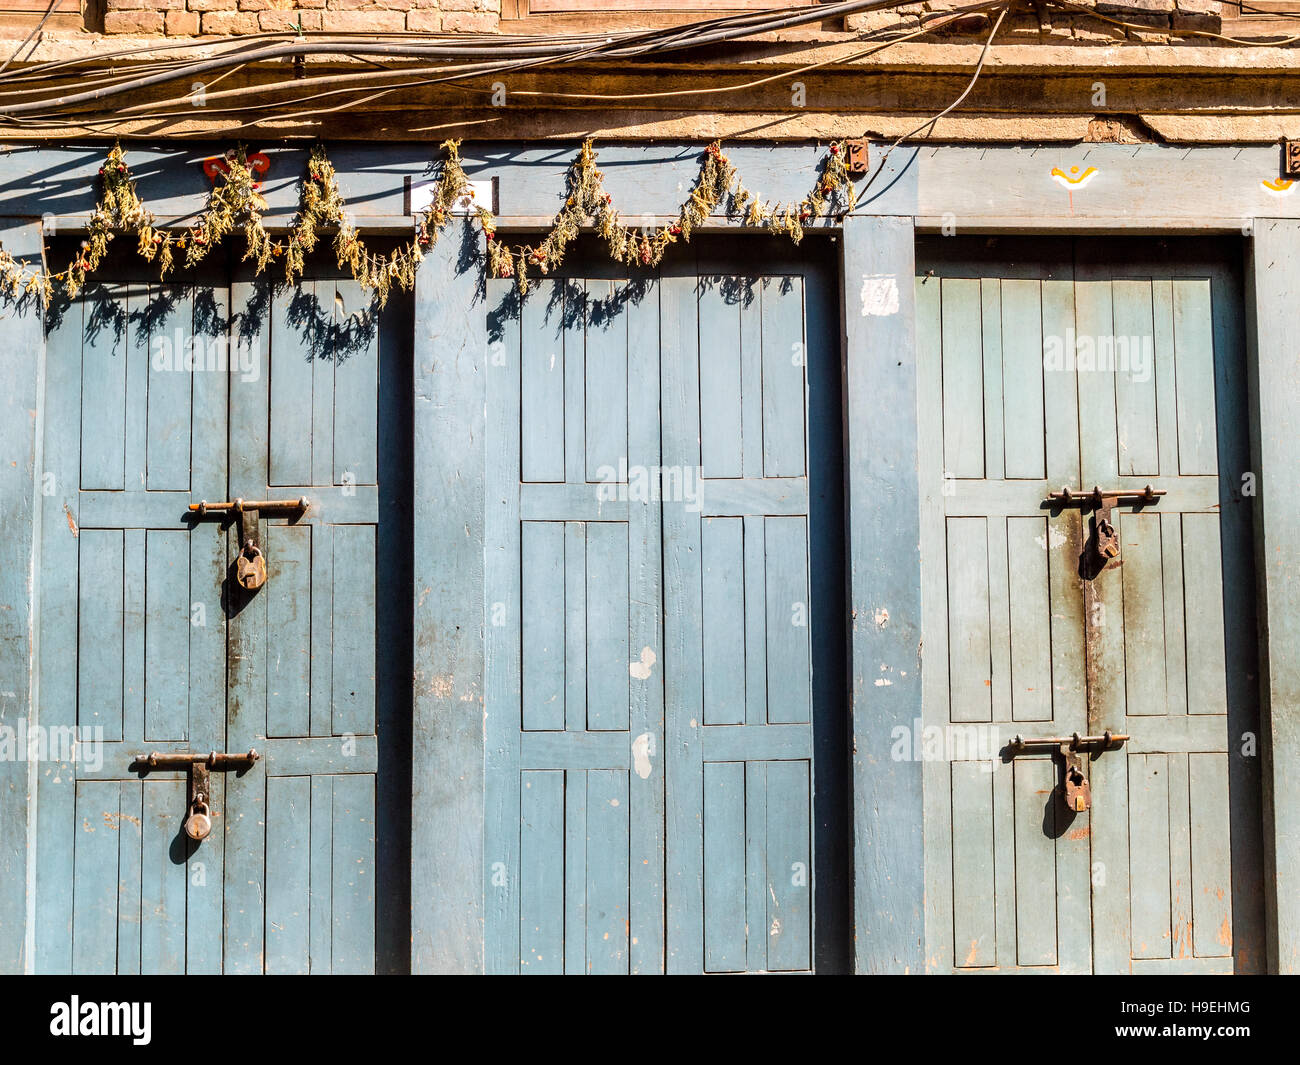 Padlocked doors at Bhaktapur, Nepal with wires and garland Stock Photo